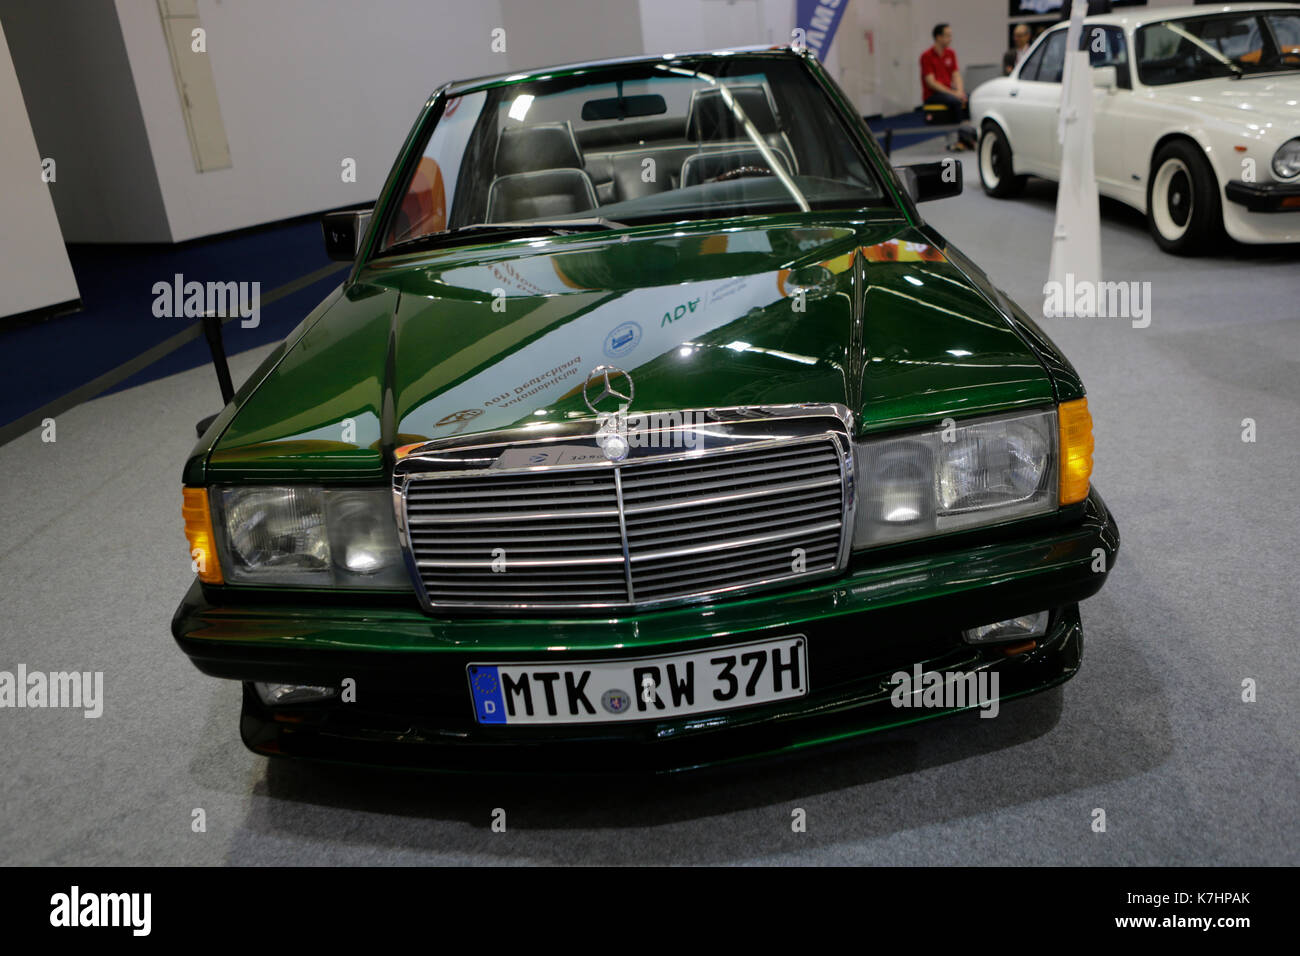 Frankfurt, Germany. 15th September 2017. A 1984 Mercedes-Benz 190 E SGS St. Tropez is presented in the special exhibition “The Wild 70s”. The 67. Internationale Automobil-Ausstellung (IAA in Frankfurt is with over 1000 exhibitors one of the largest Motor Shows in the world. The show will open for the general public from the 16th until the 24th September. Stock Photo